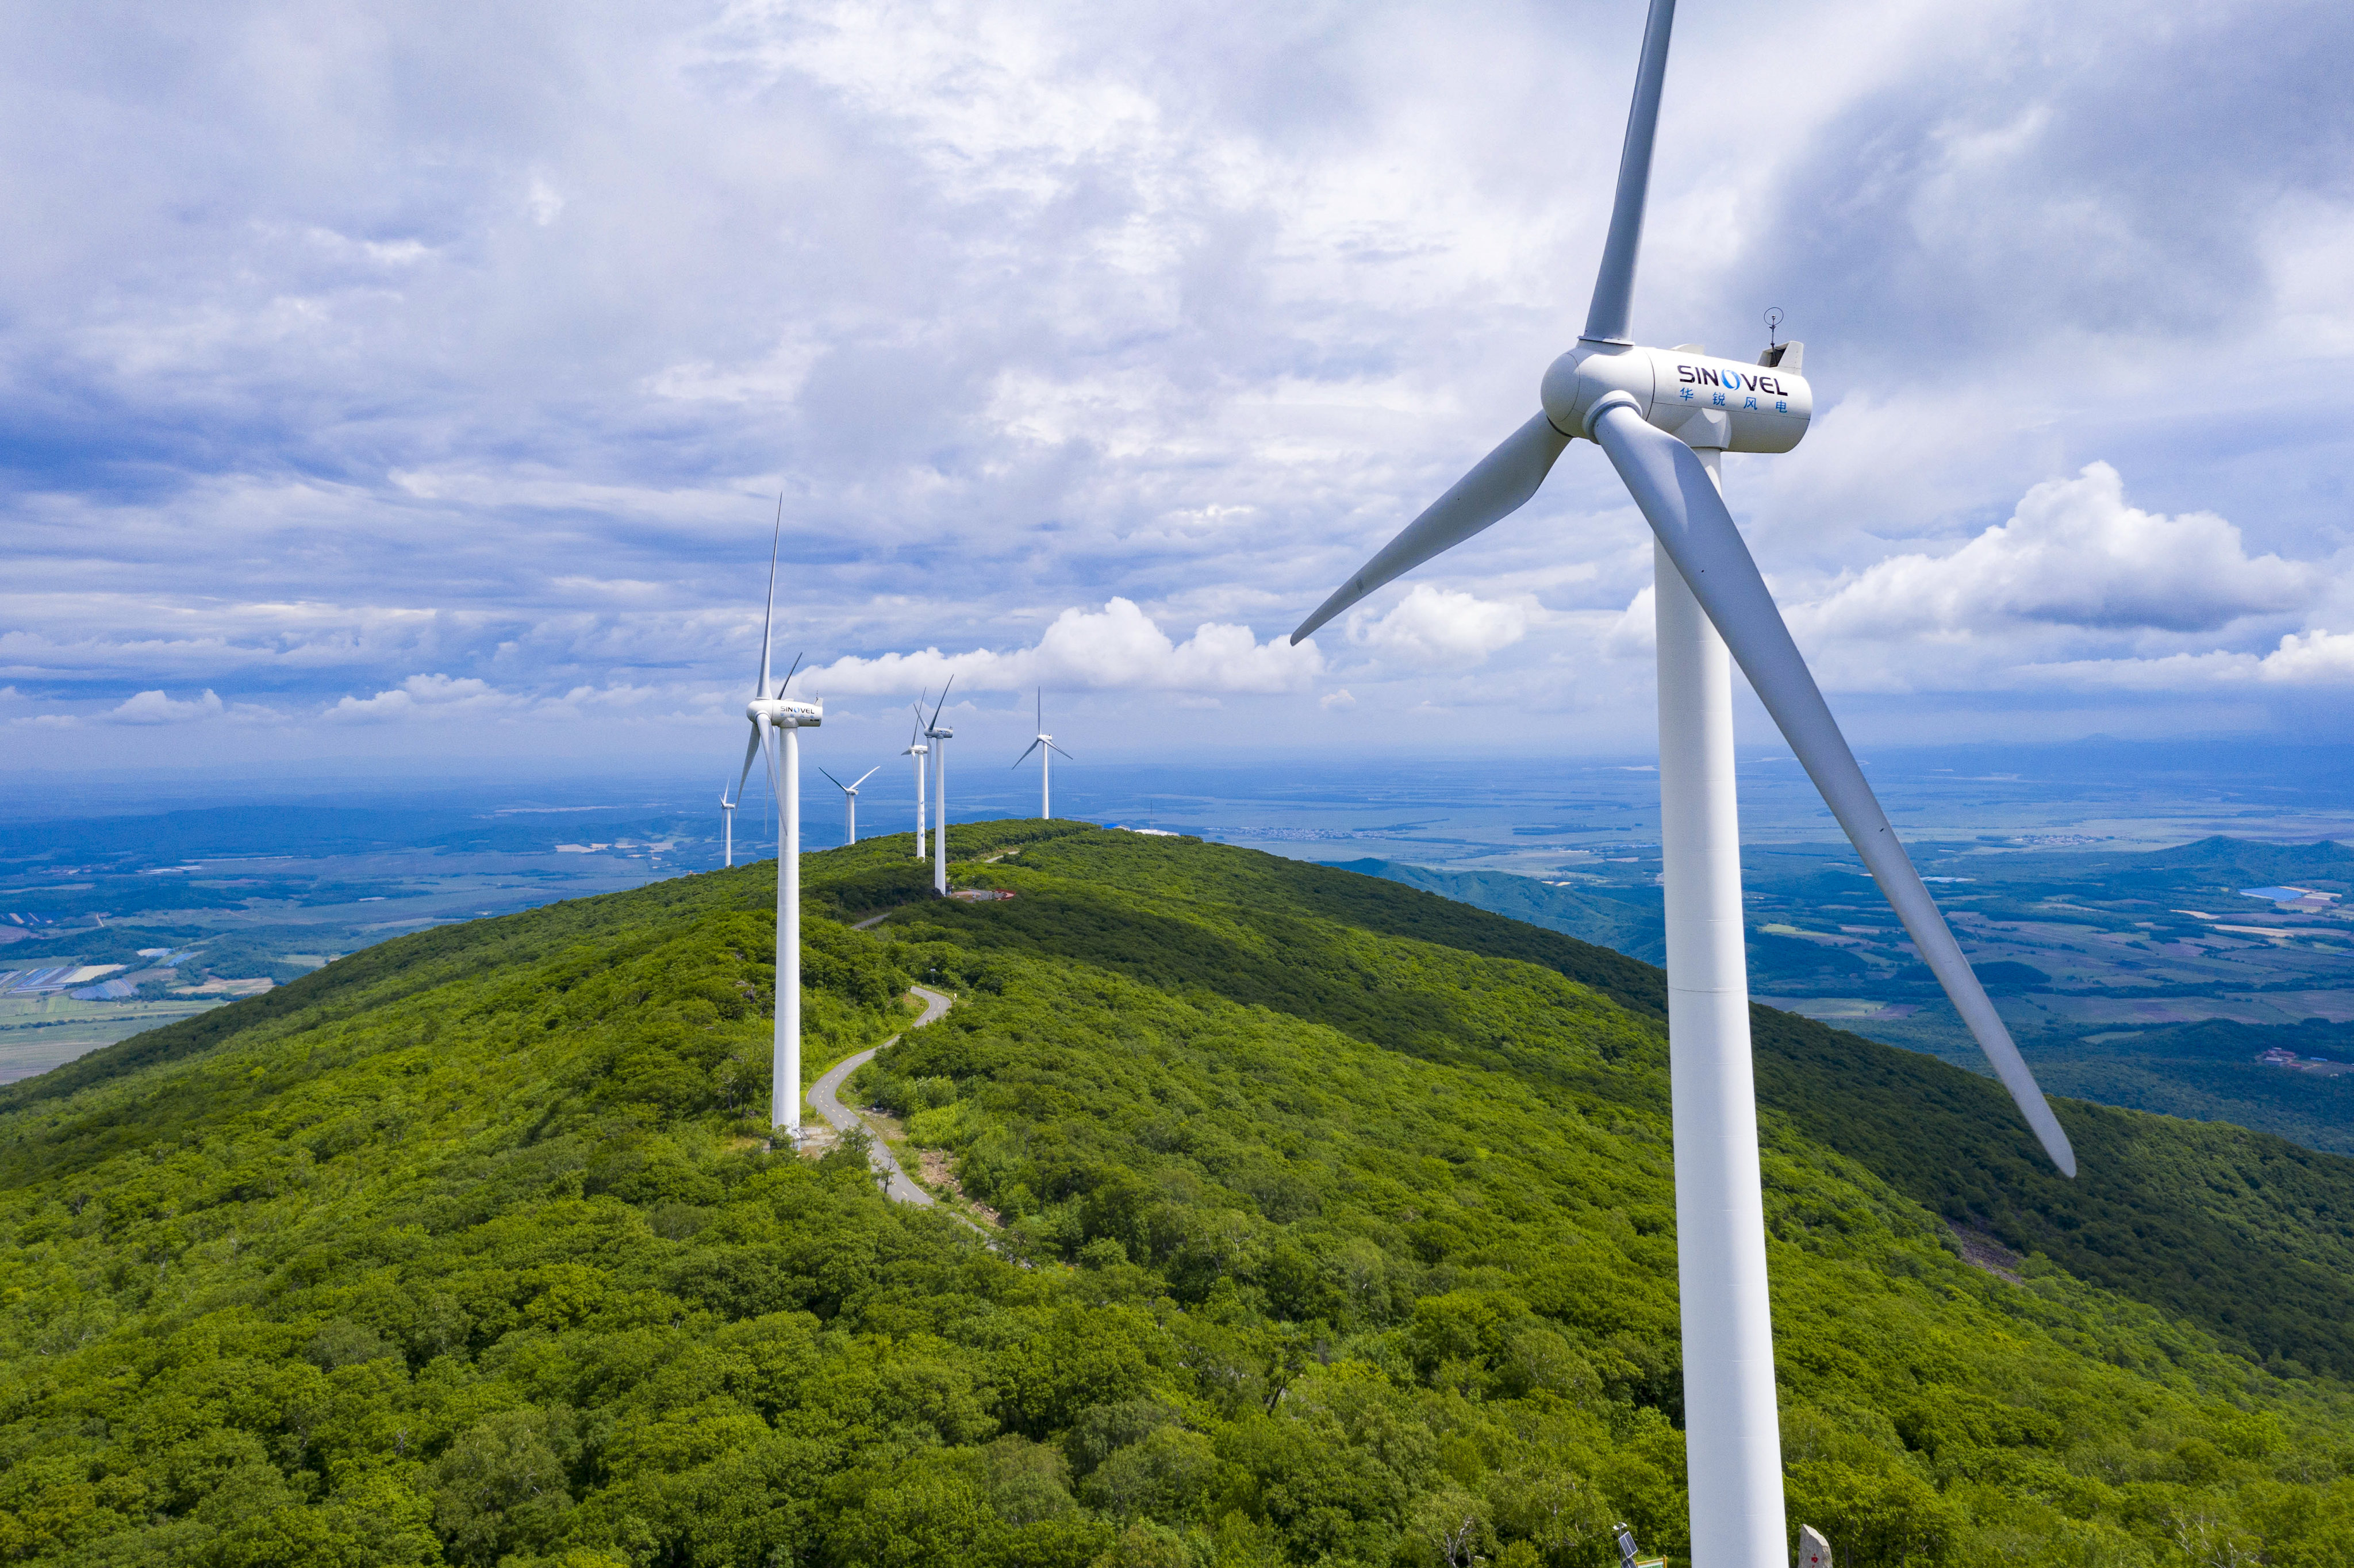 Wind turbines stretch into the distance in Dadingzi Mountain Forest Park, Raohe, in China’s Heilongjiang province, on June 19. Just because the tech bubble has burst doesn’t mean there are no worthwhile roads left to take. Photo: Xinhua